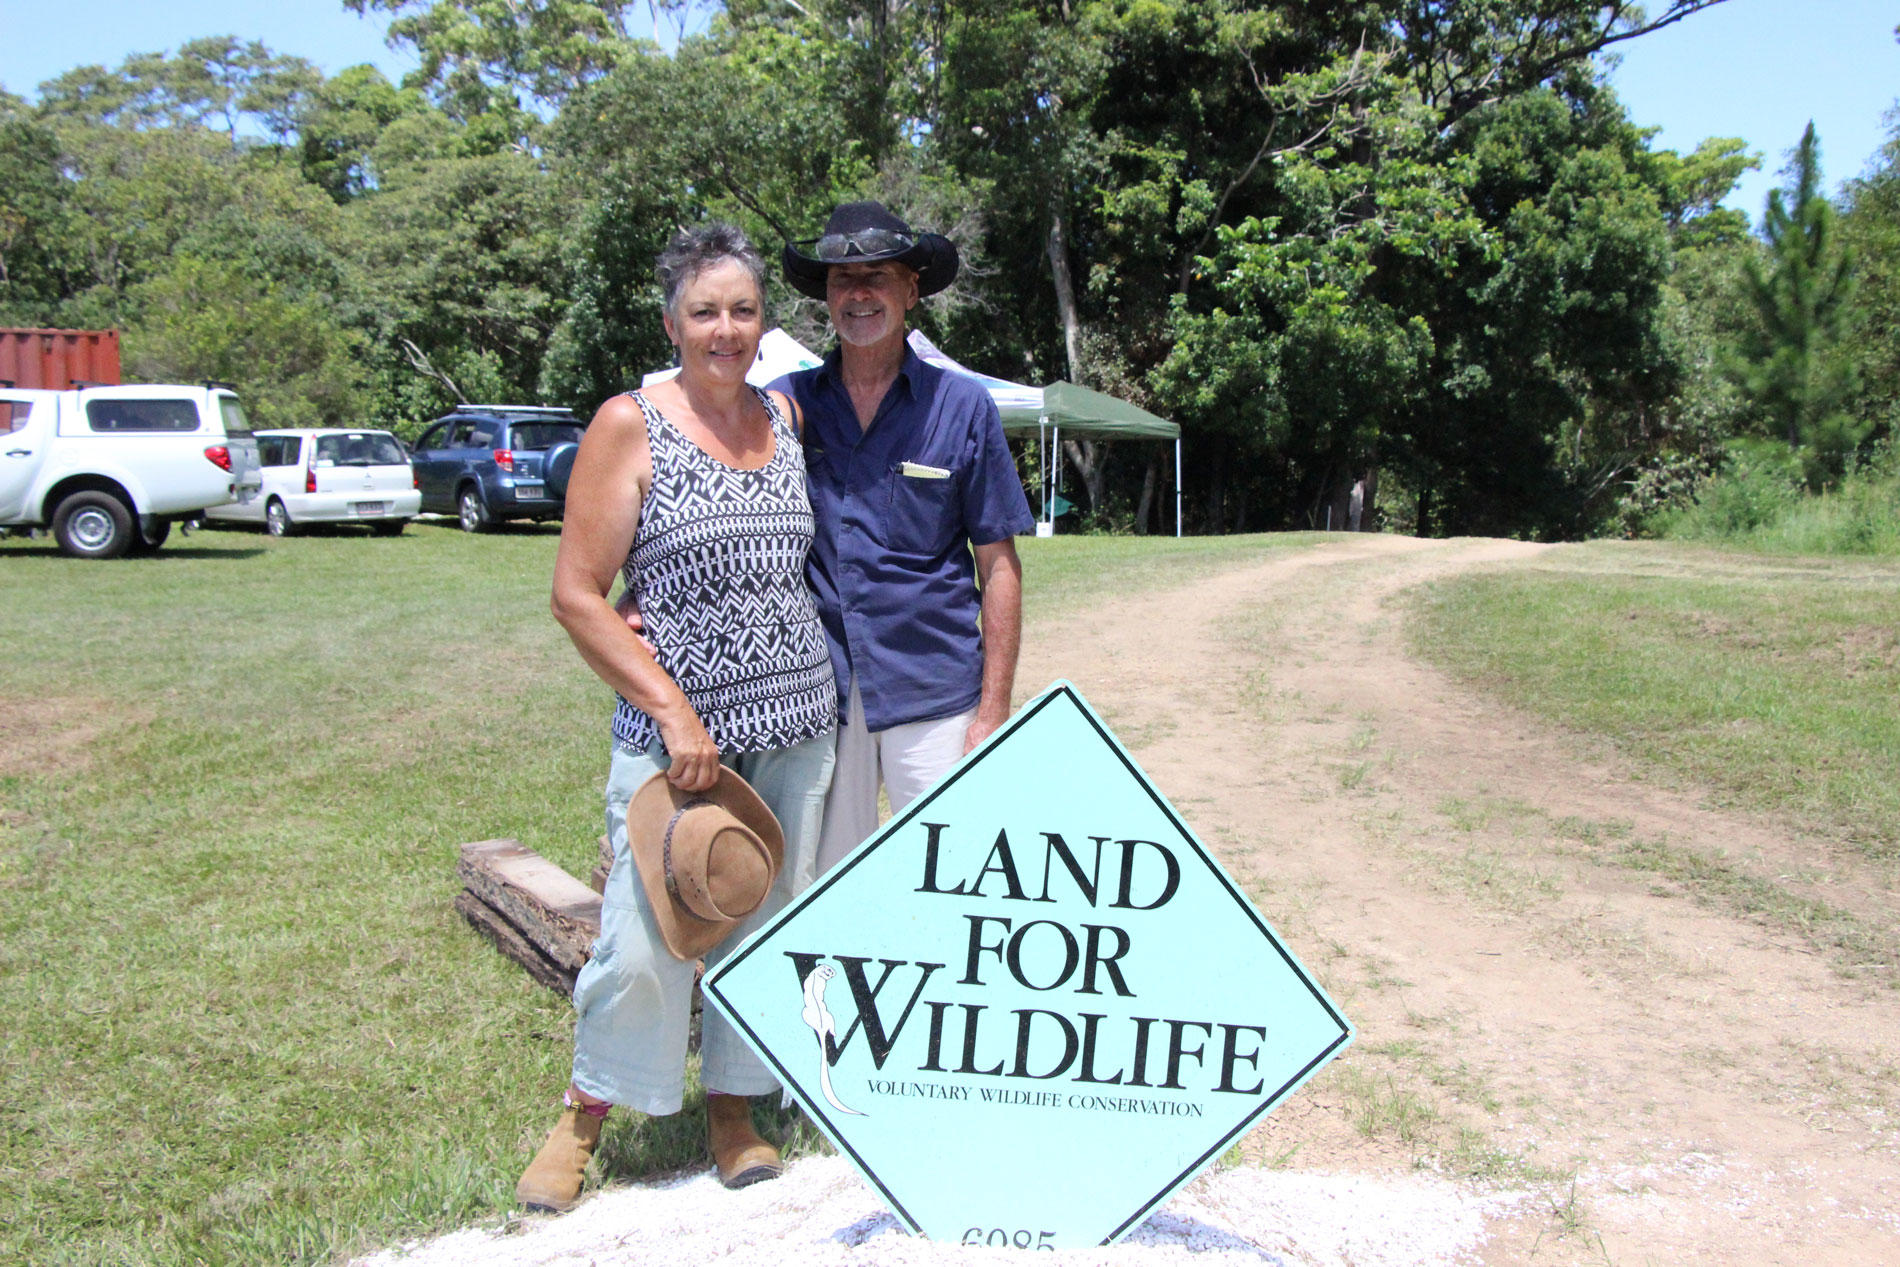 Bev & Laurie proudly displaying the Land for Wildlife Sign